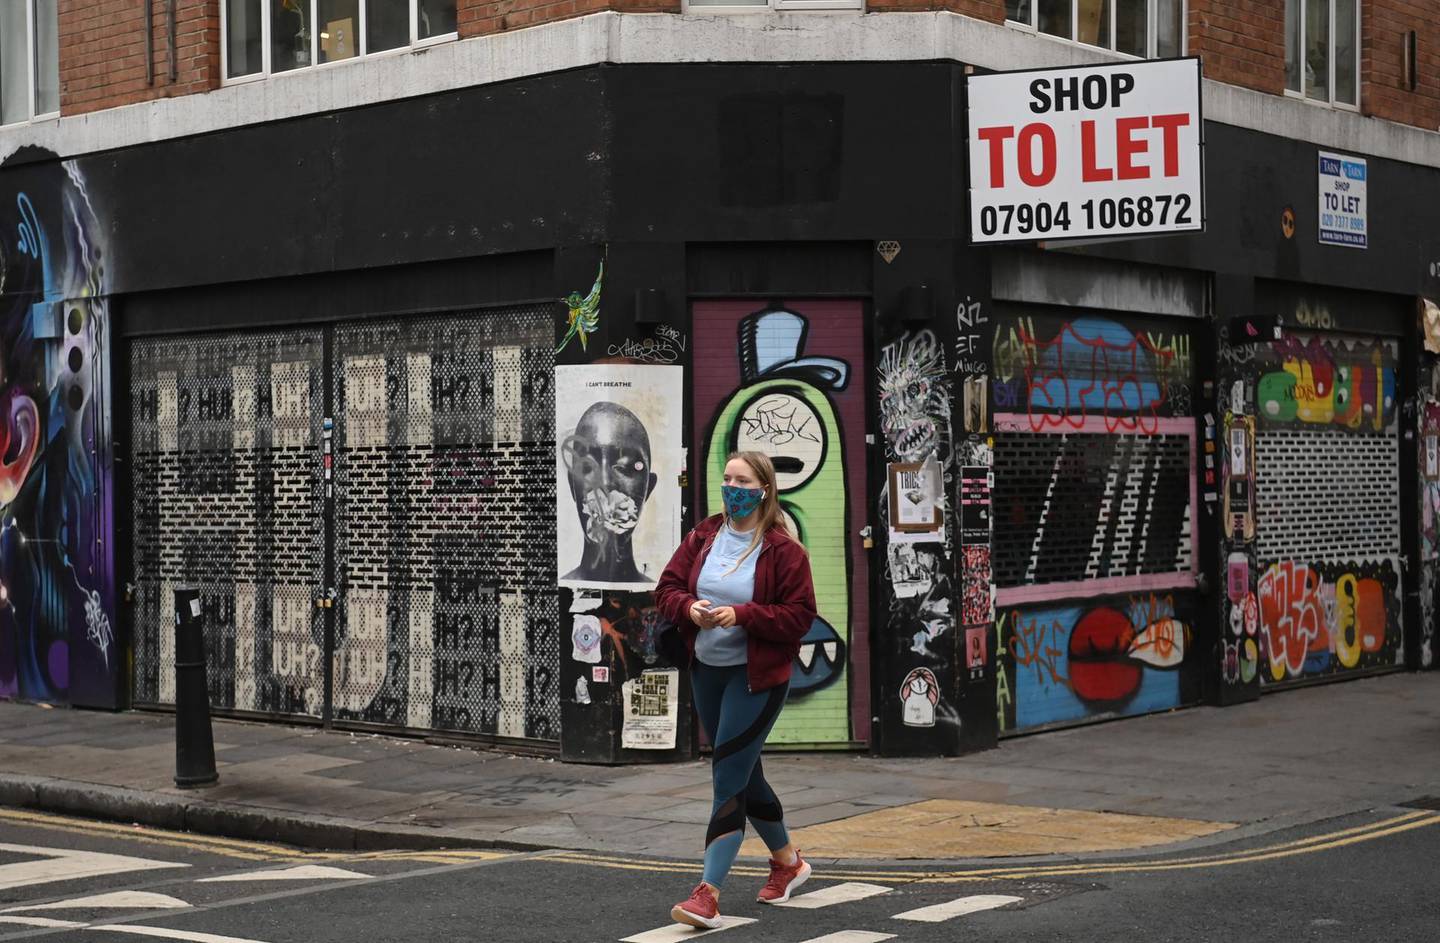 epa08740397 A masked woman passes a closed shop in the Tower Hamlet area of London, Britain, 13 October 2020. The UK unemployment rate rose to 4.5 percent between June and August as the pandemic continued to hit jobs.  EPA/NEIL HALL